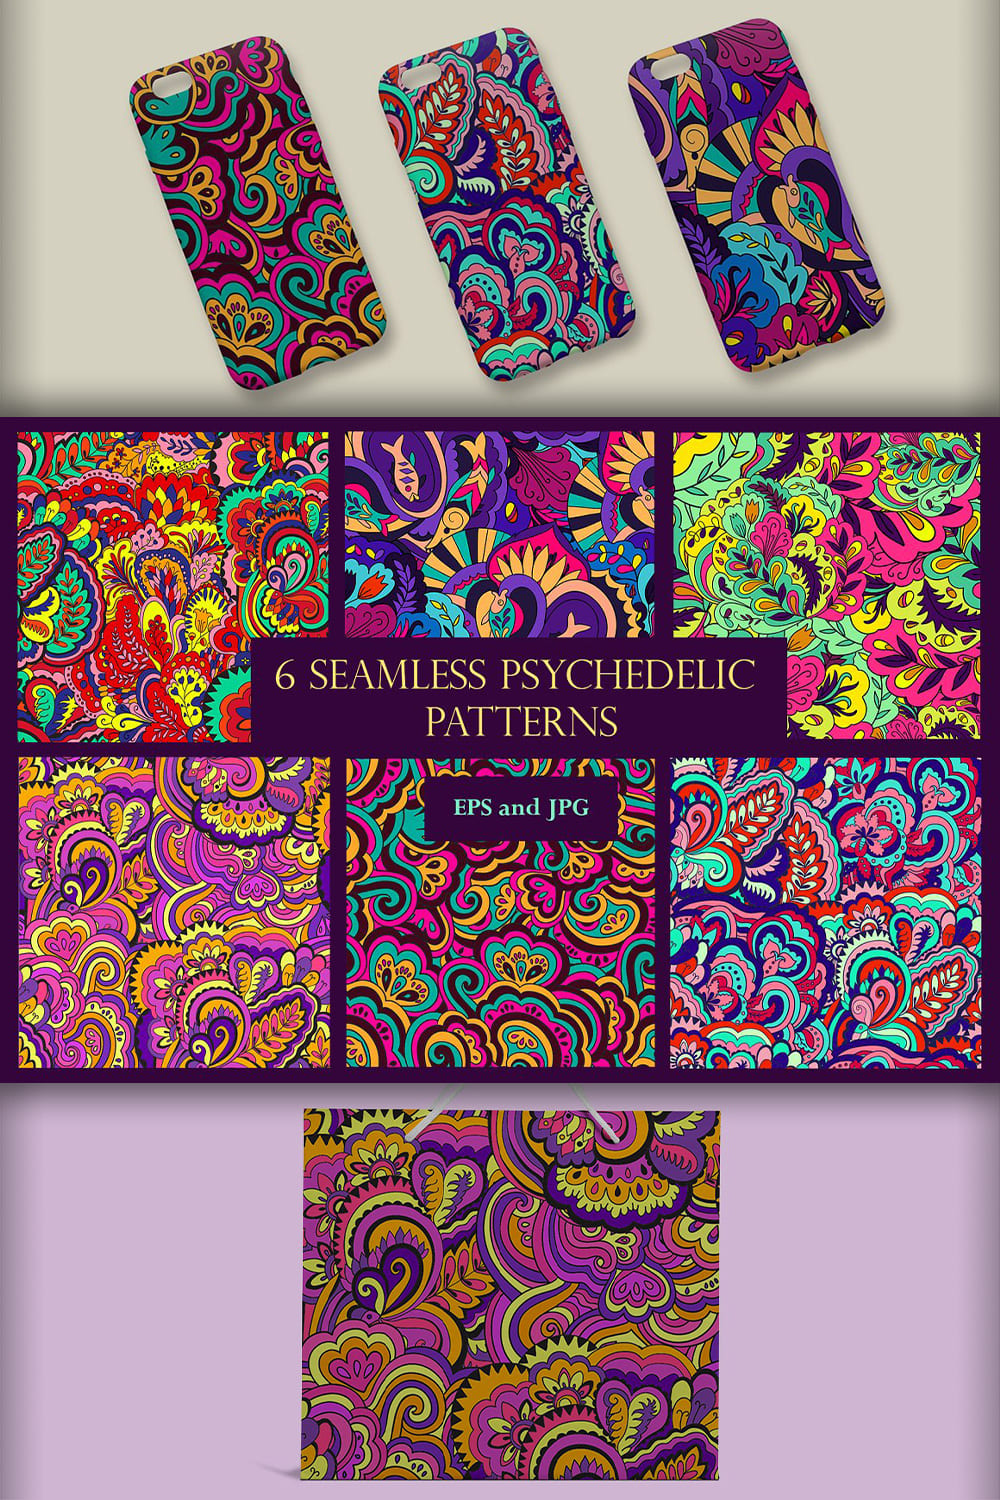 6 Seamless Psychedelic Patterns pinterest image.